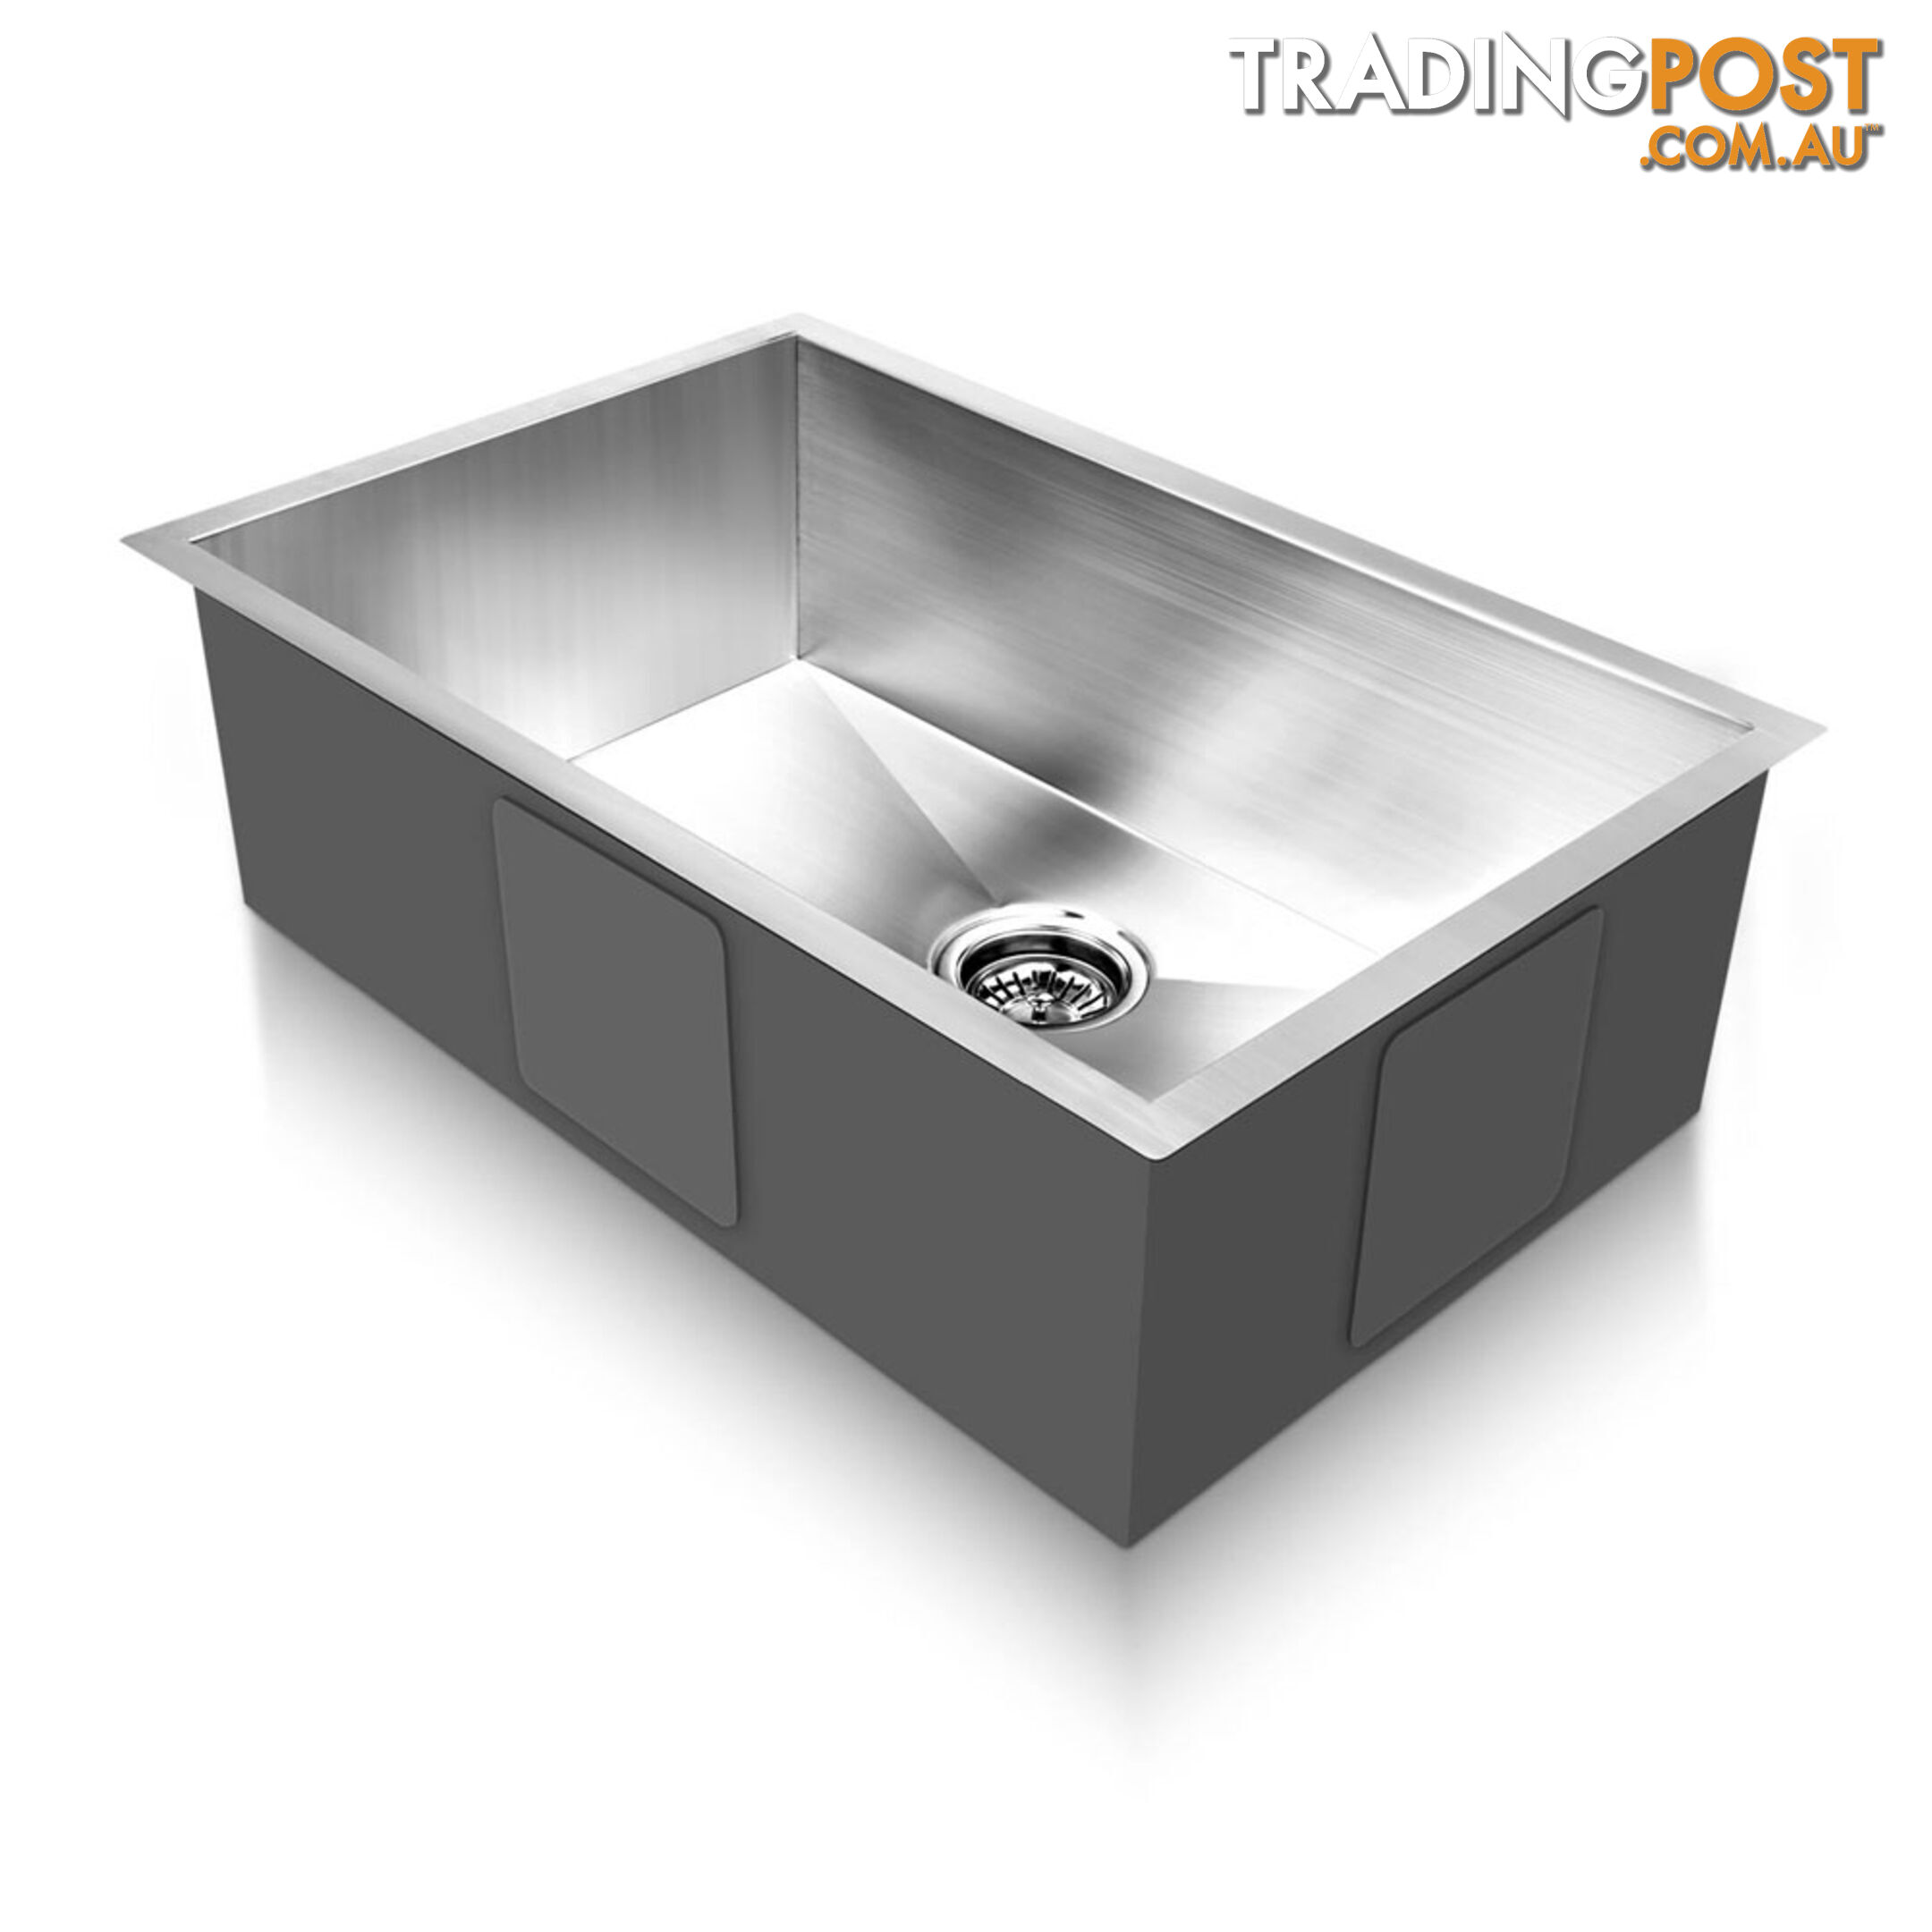 Stainless Steel Kitchen Laundry Sink 700 x 450mm